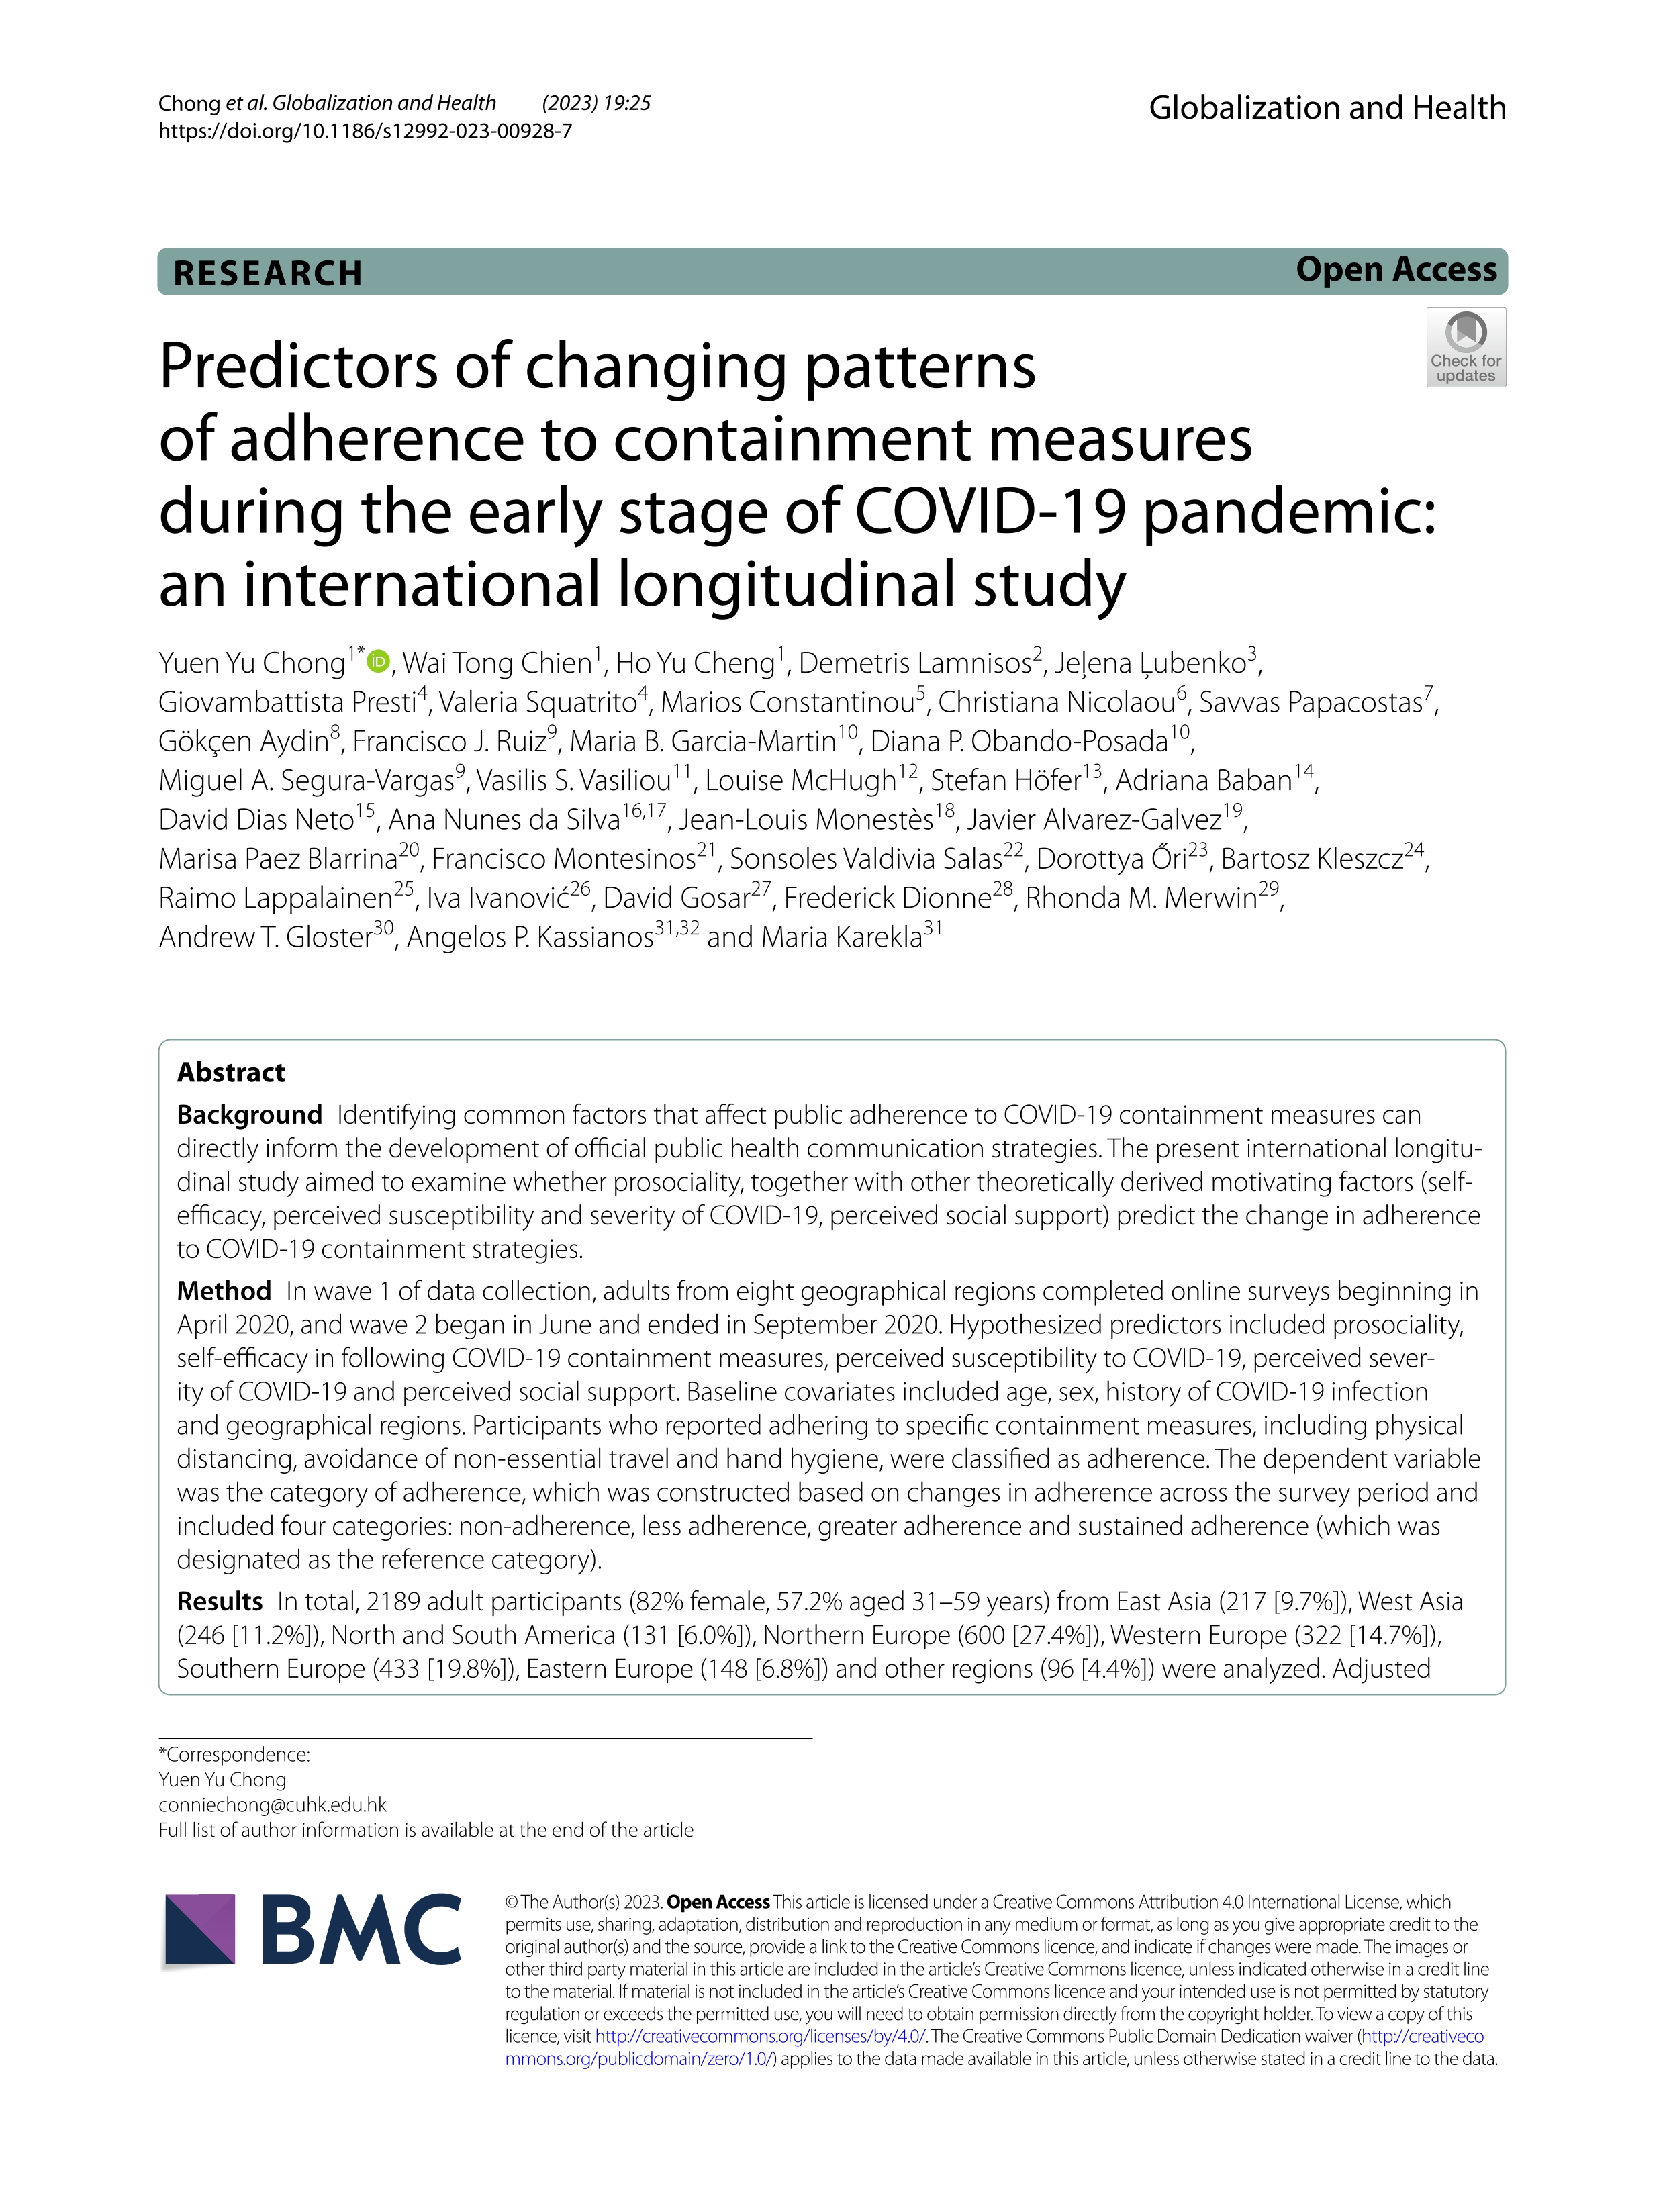 Predictors of changing patterns of adherence to containment measures during the early stage of COVID-19 pandemic: an international longitudinal study